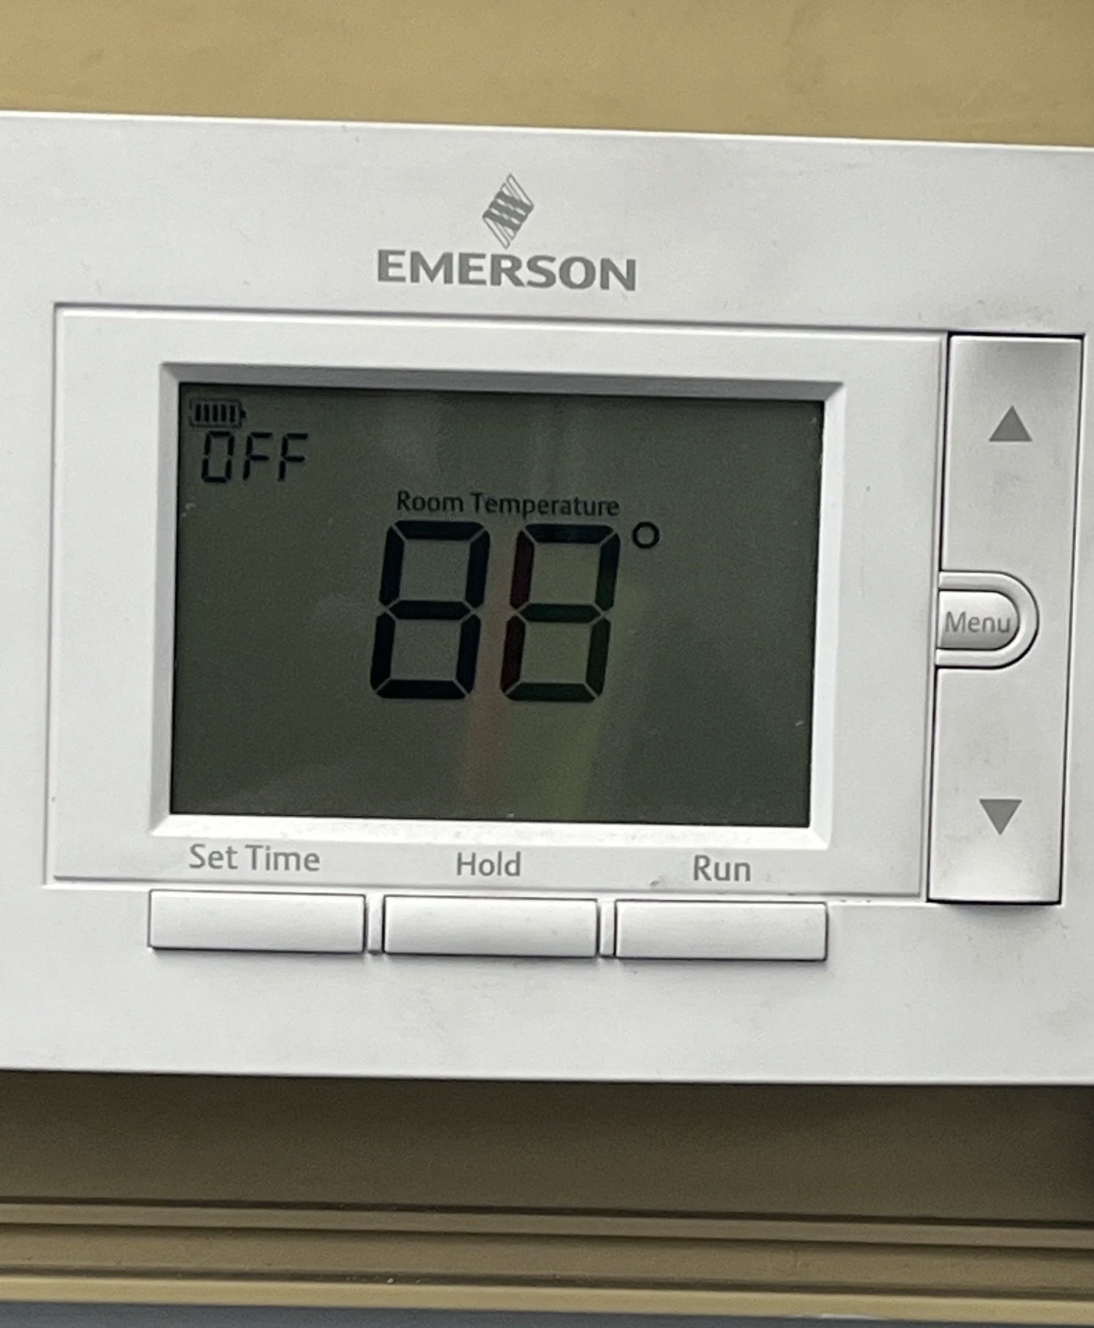 A thermostat set at 88 degrees